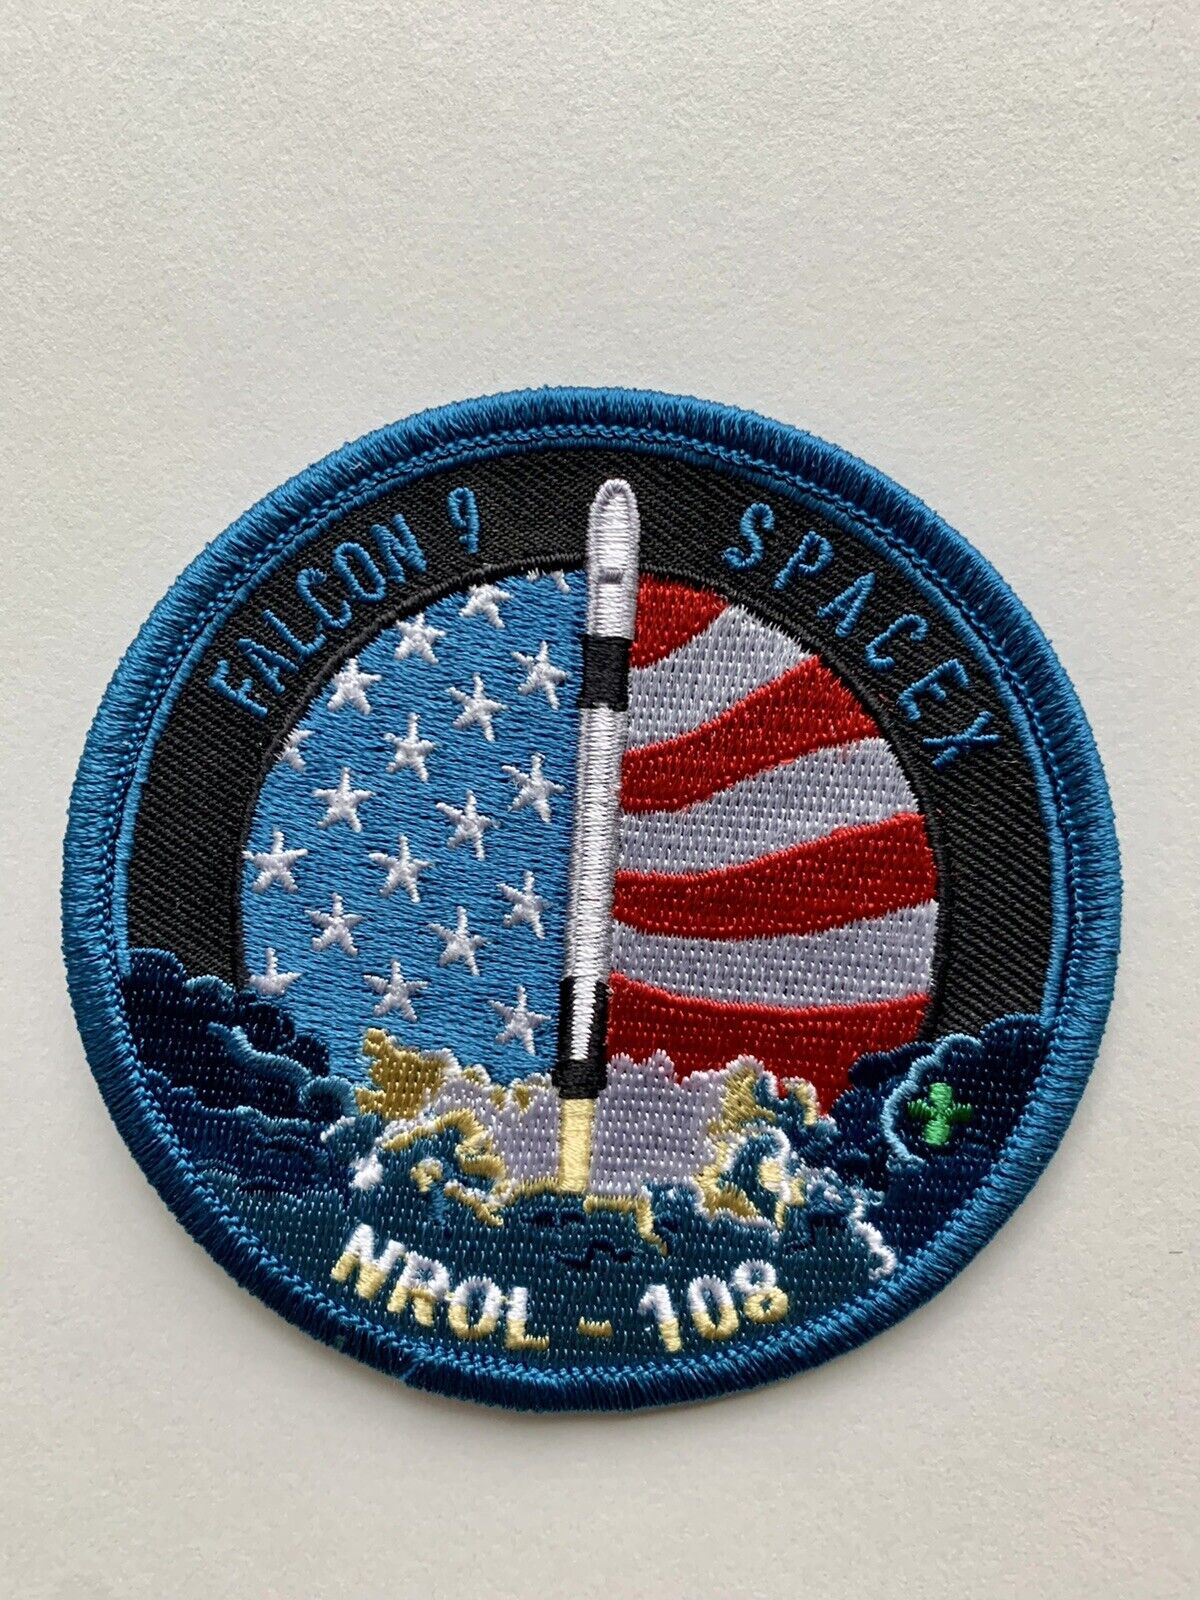 Original SpaceX Falcon 9 NROL-108 Mission Patch NASA 3.5” Mint Condition